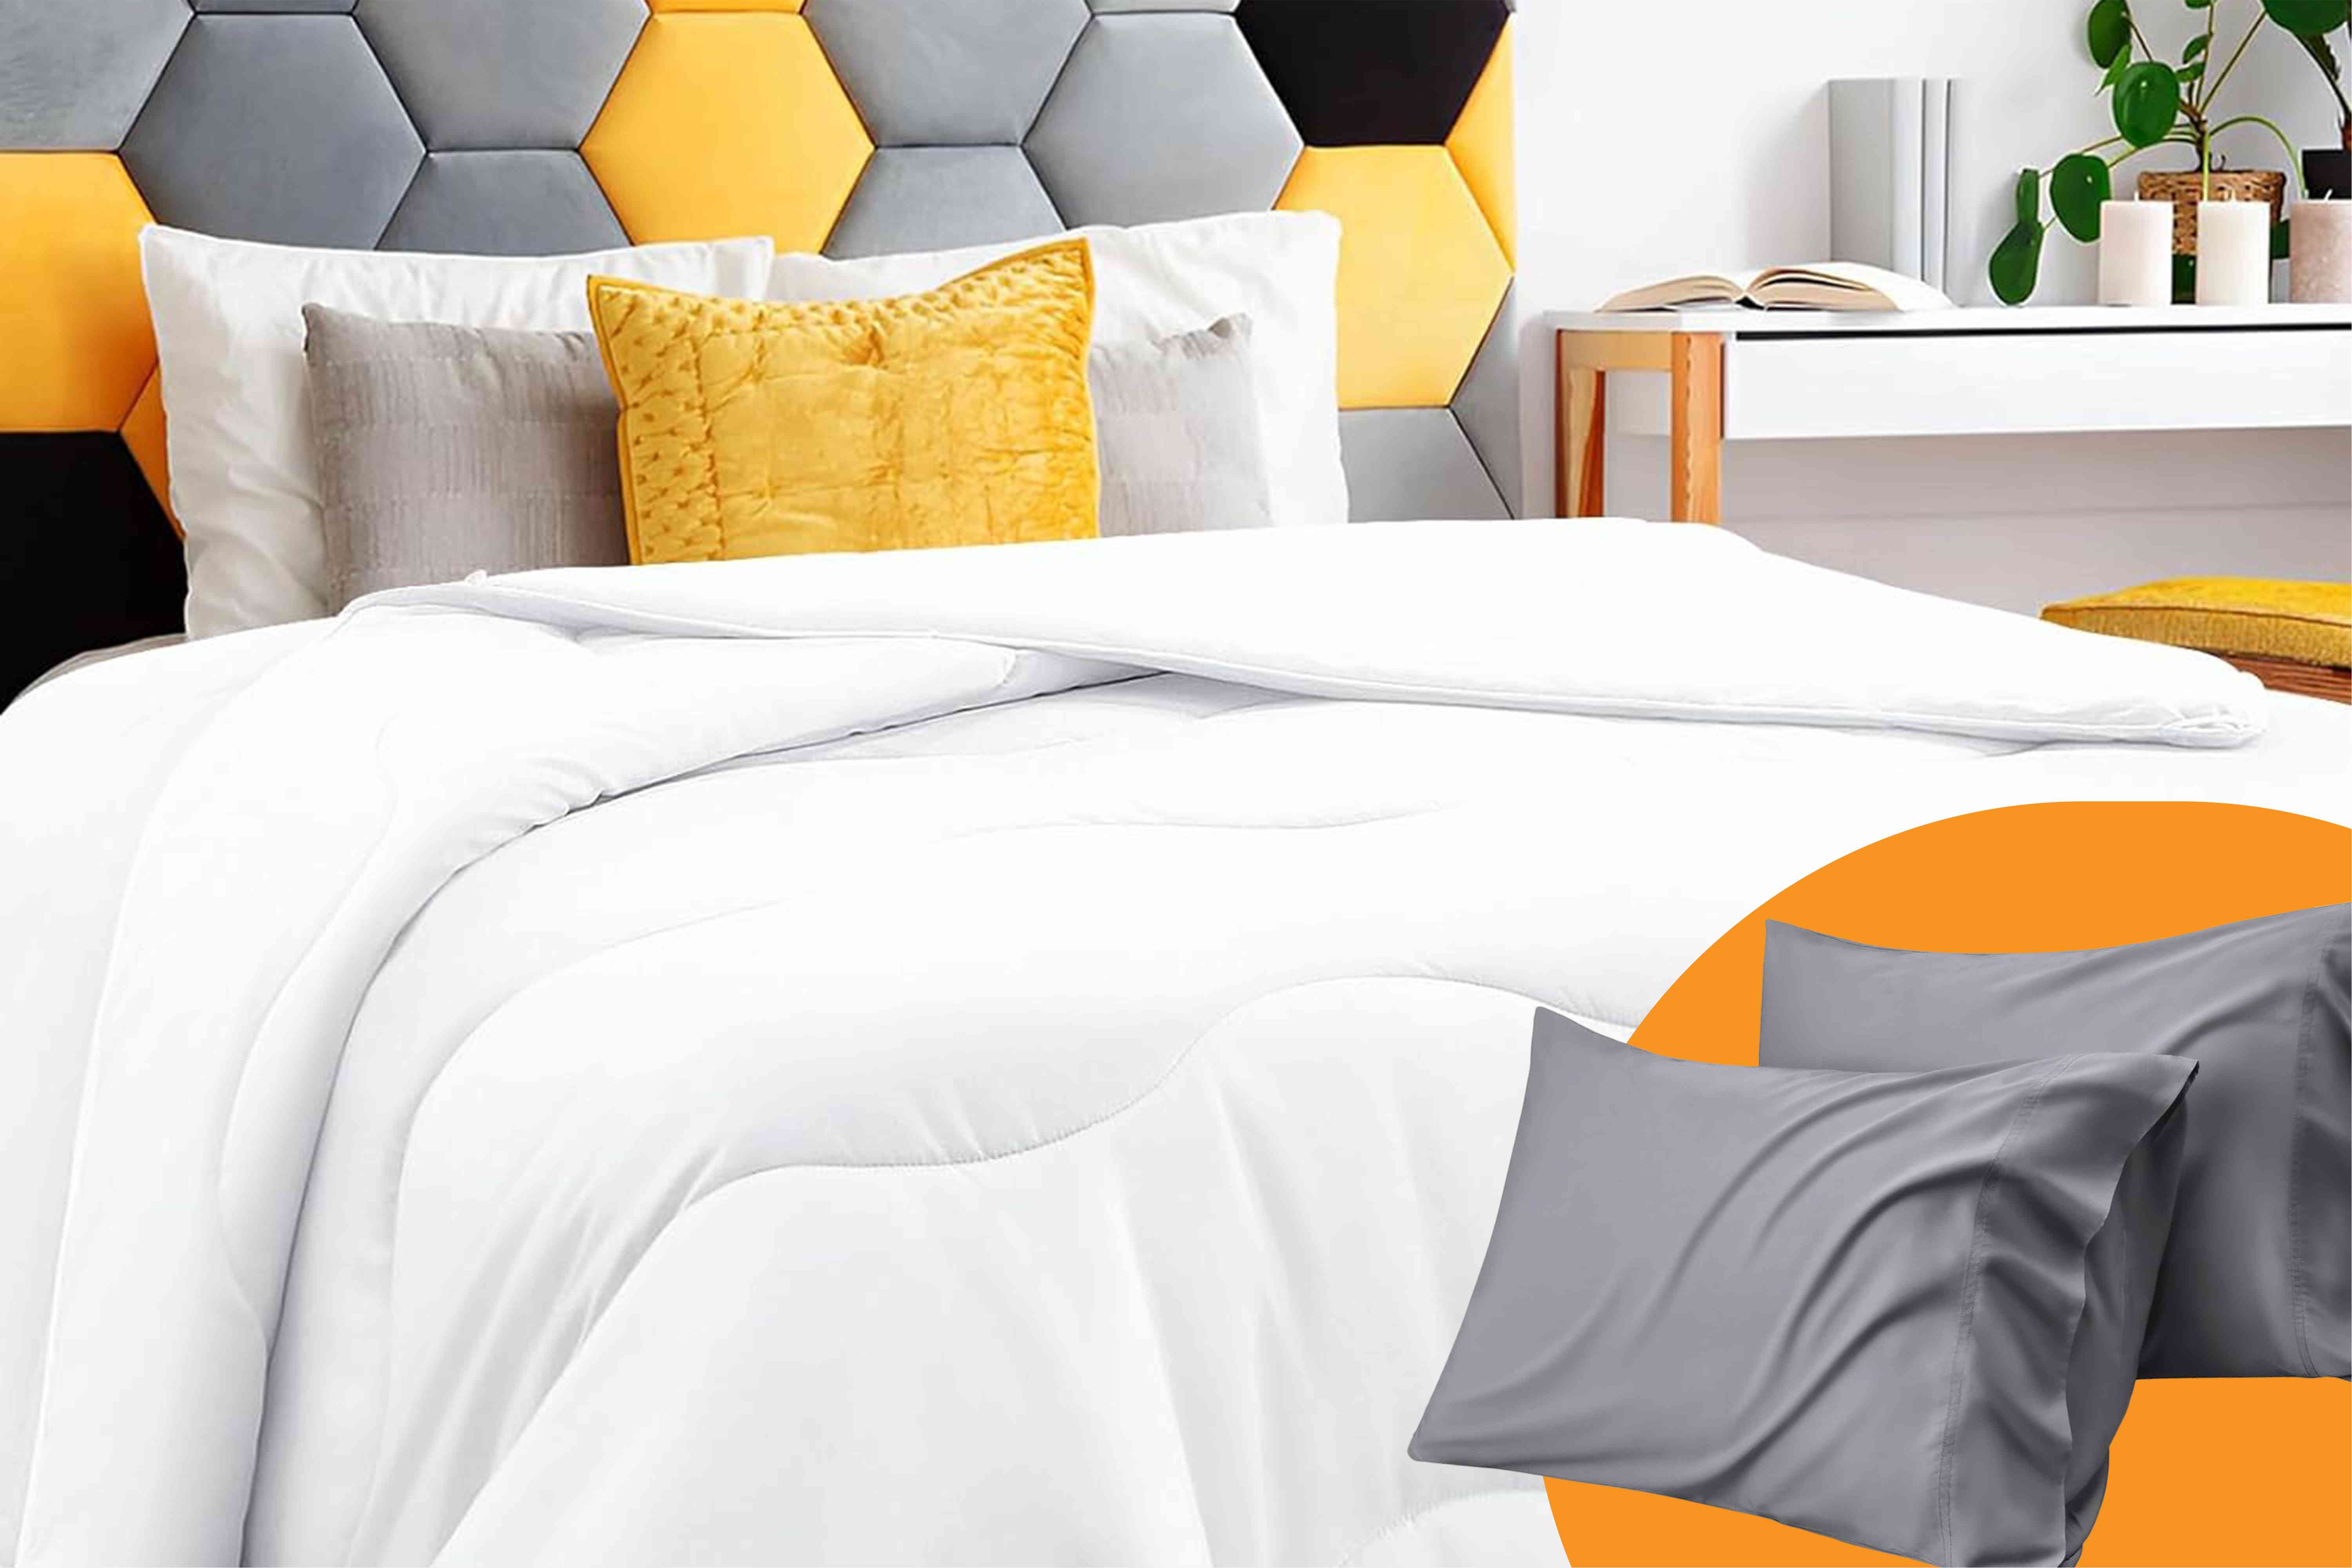 Amazon Is Overflowing with Summer Bedding for Up to 71% Off Right Now